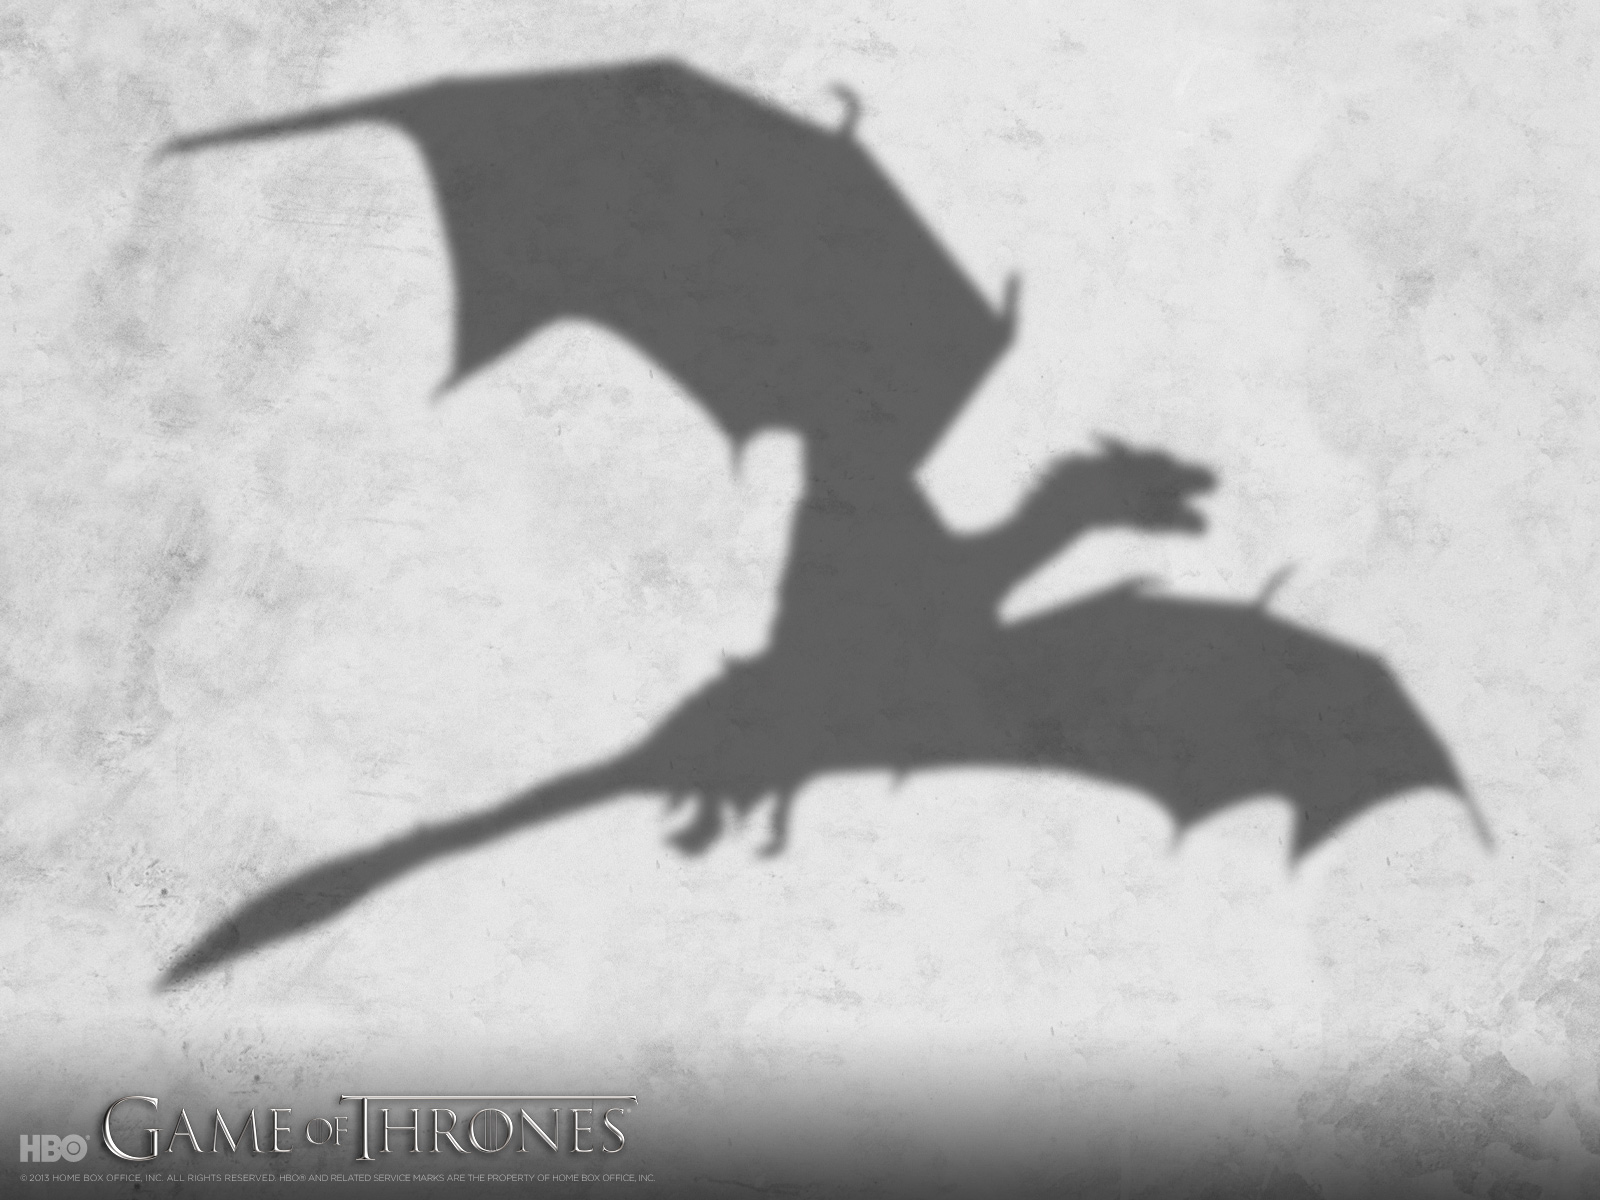 Dragon Flying Game Of Thrones - HD Wallpaper 